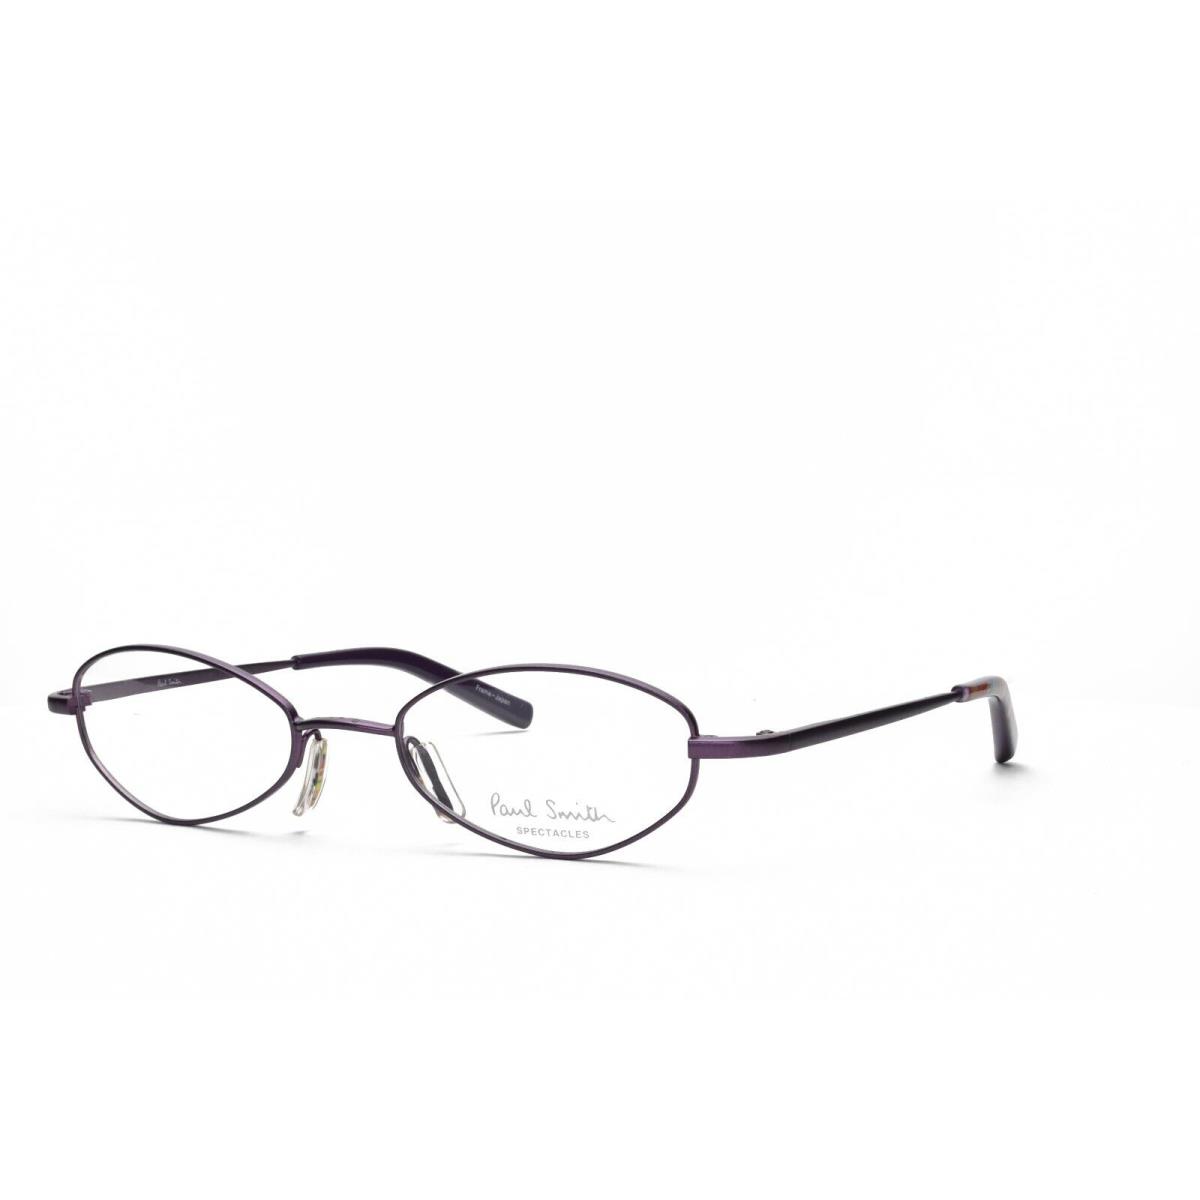 Paul Smith PS 198 Pur Eyeglasses Frames Only 48-19-132